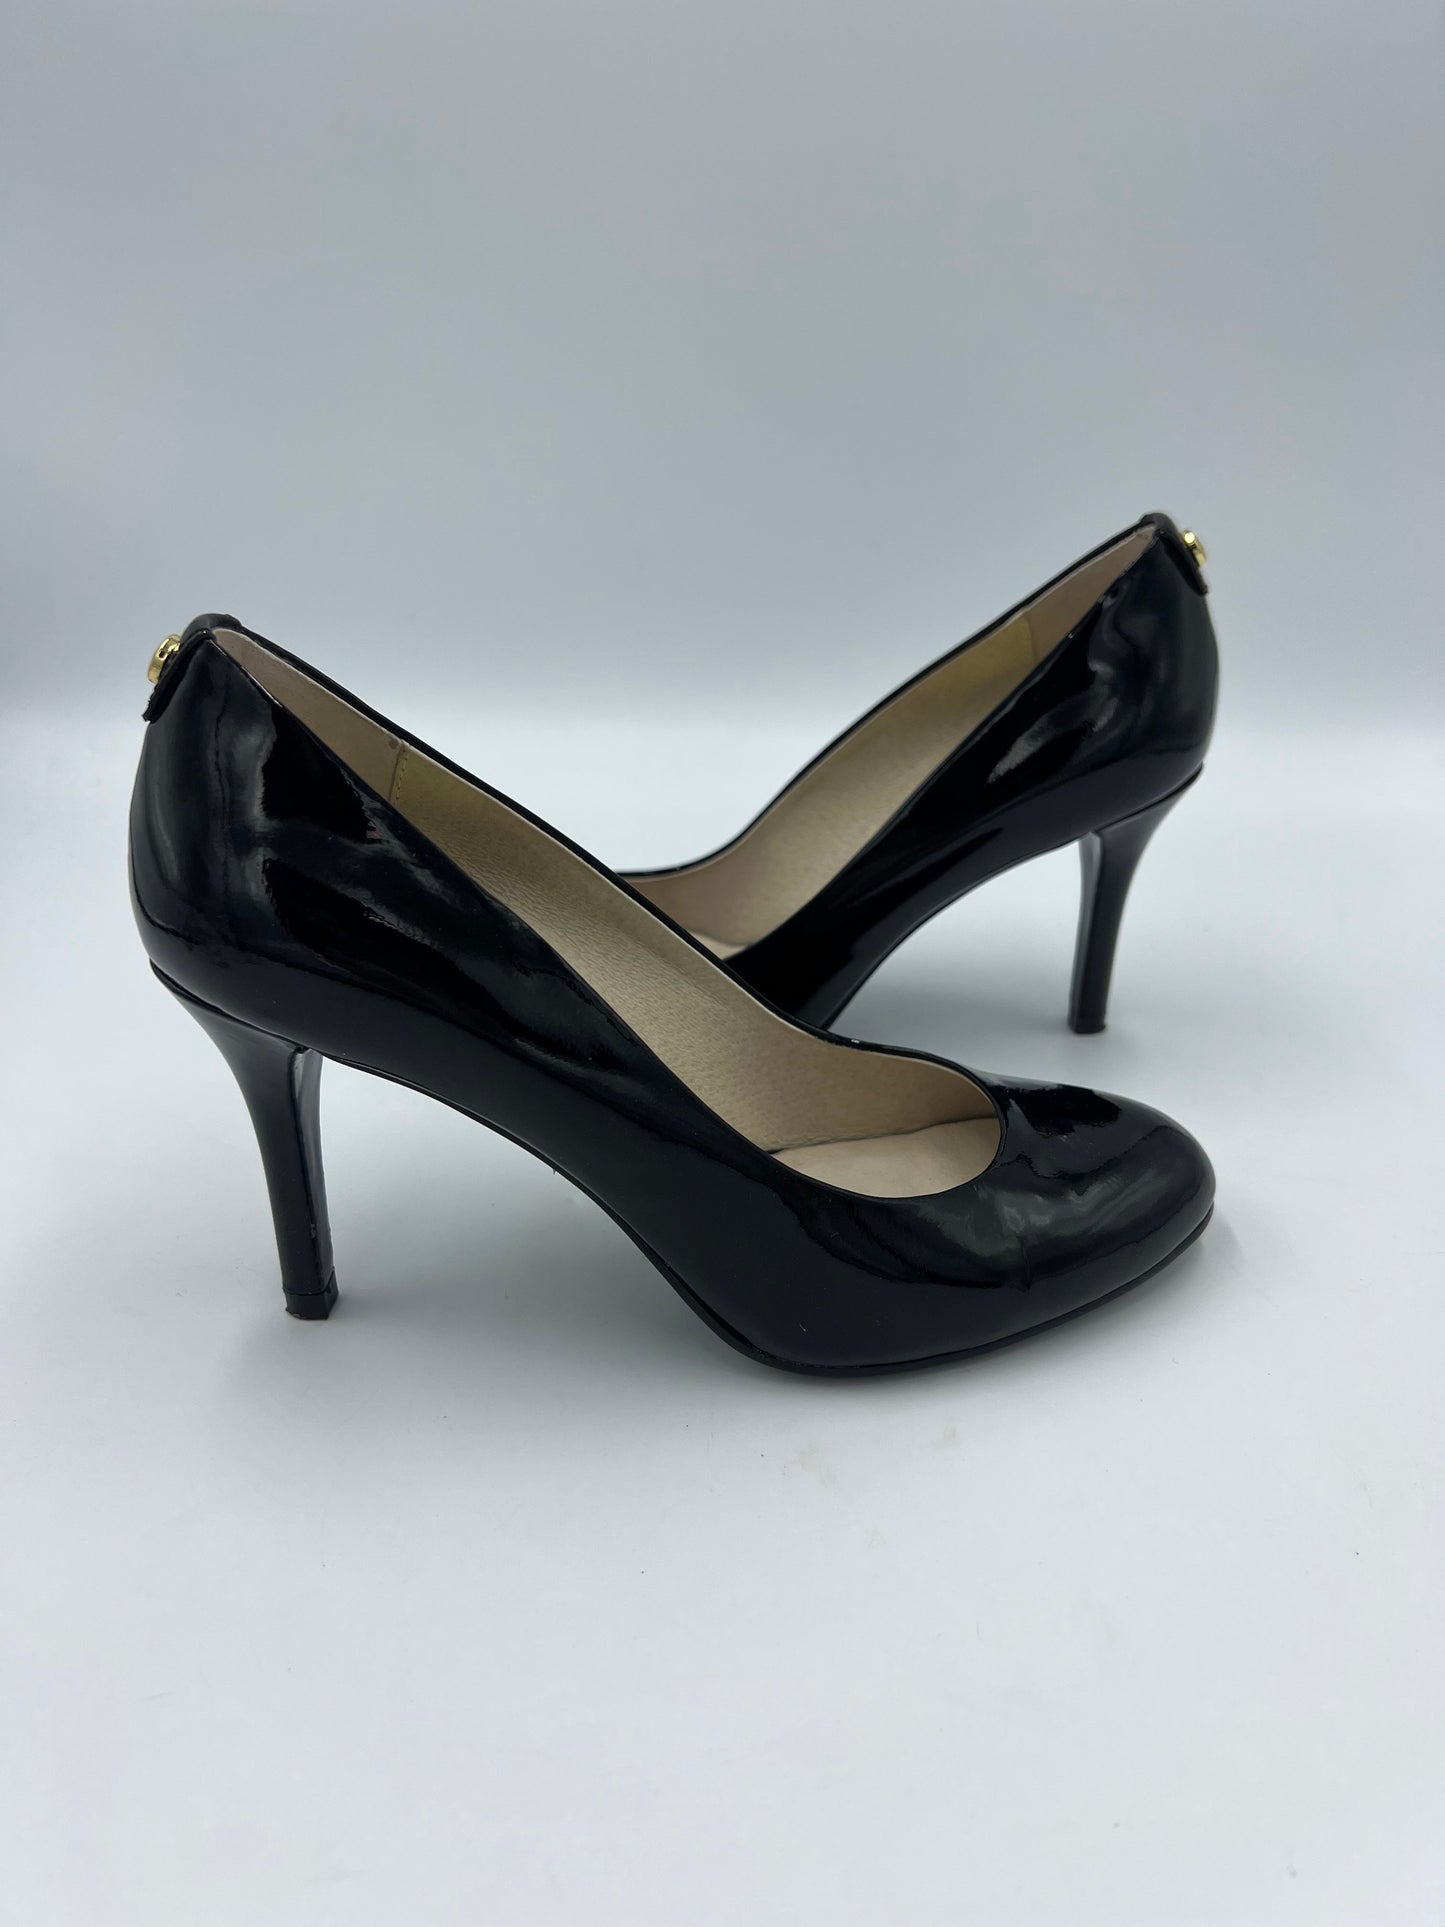 Like New! Shoes Heels Stiletto By Michael Kors  Size: 5